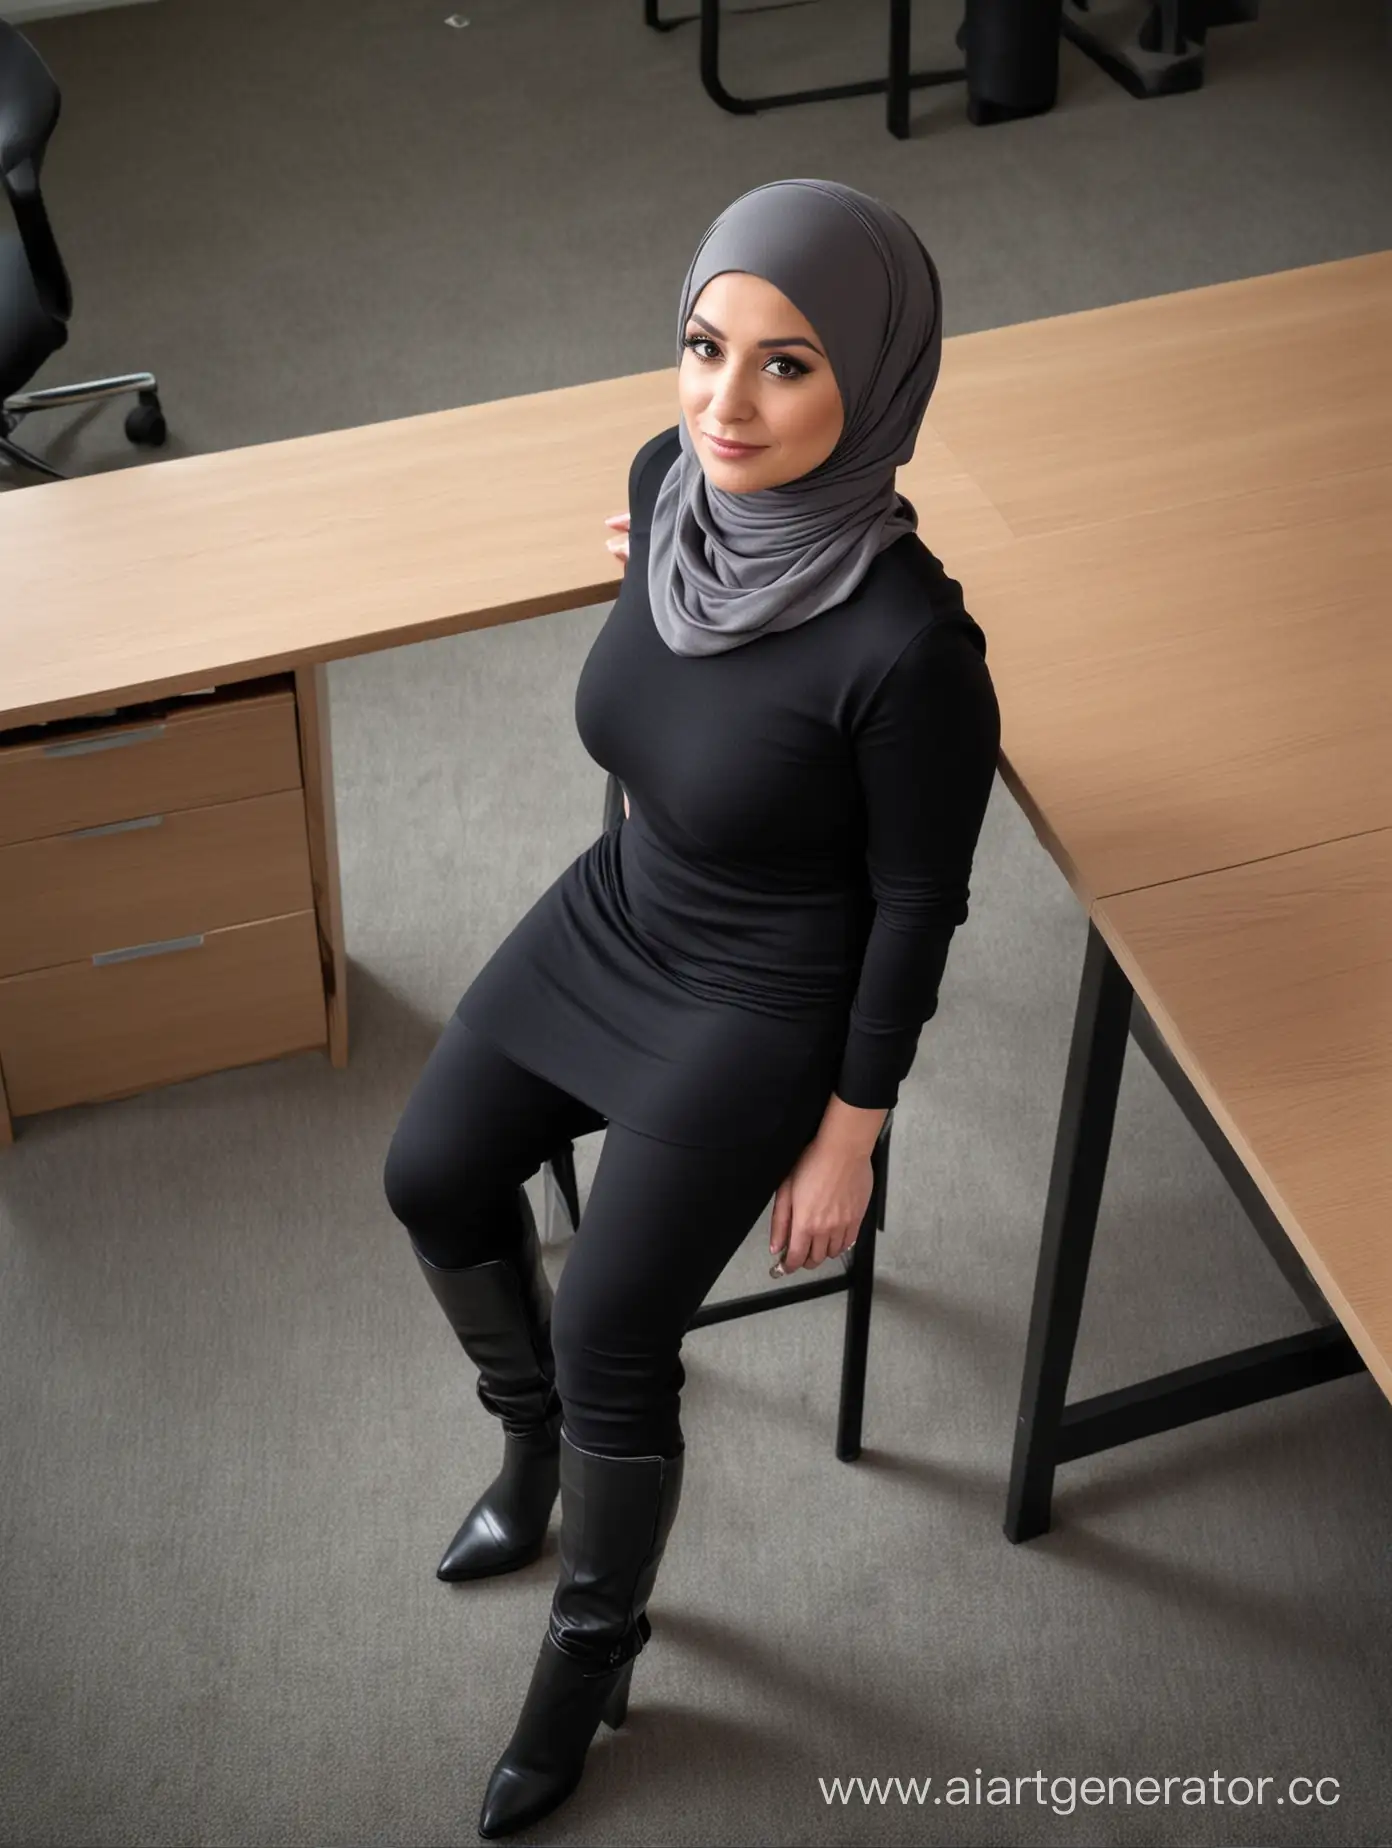 Dwarf-Woman-in-Office-Setting-HijabClad-Professional-at-Work